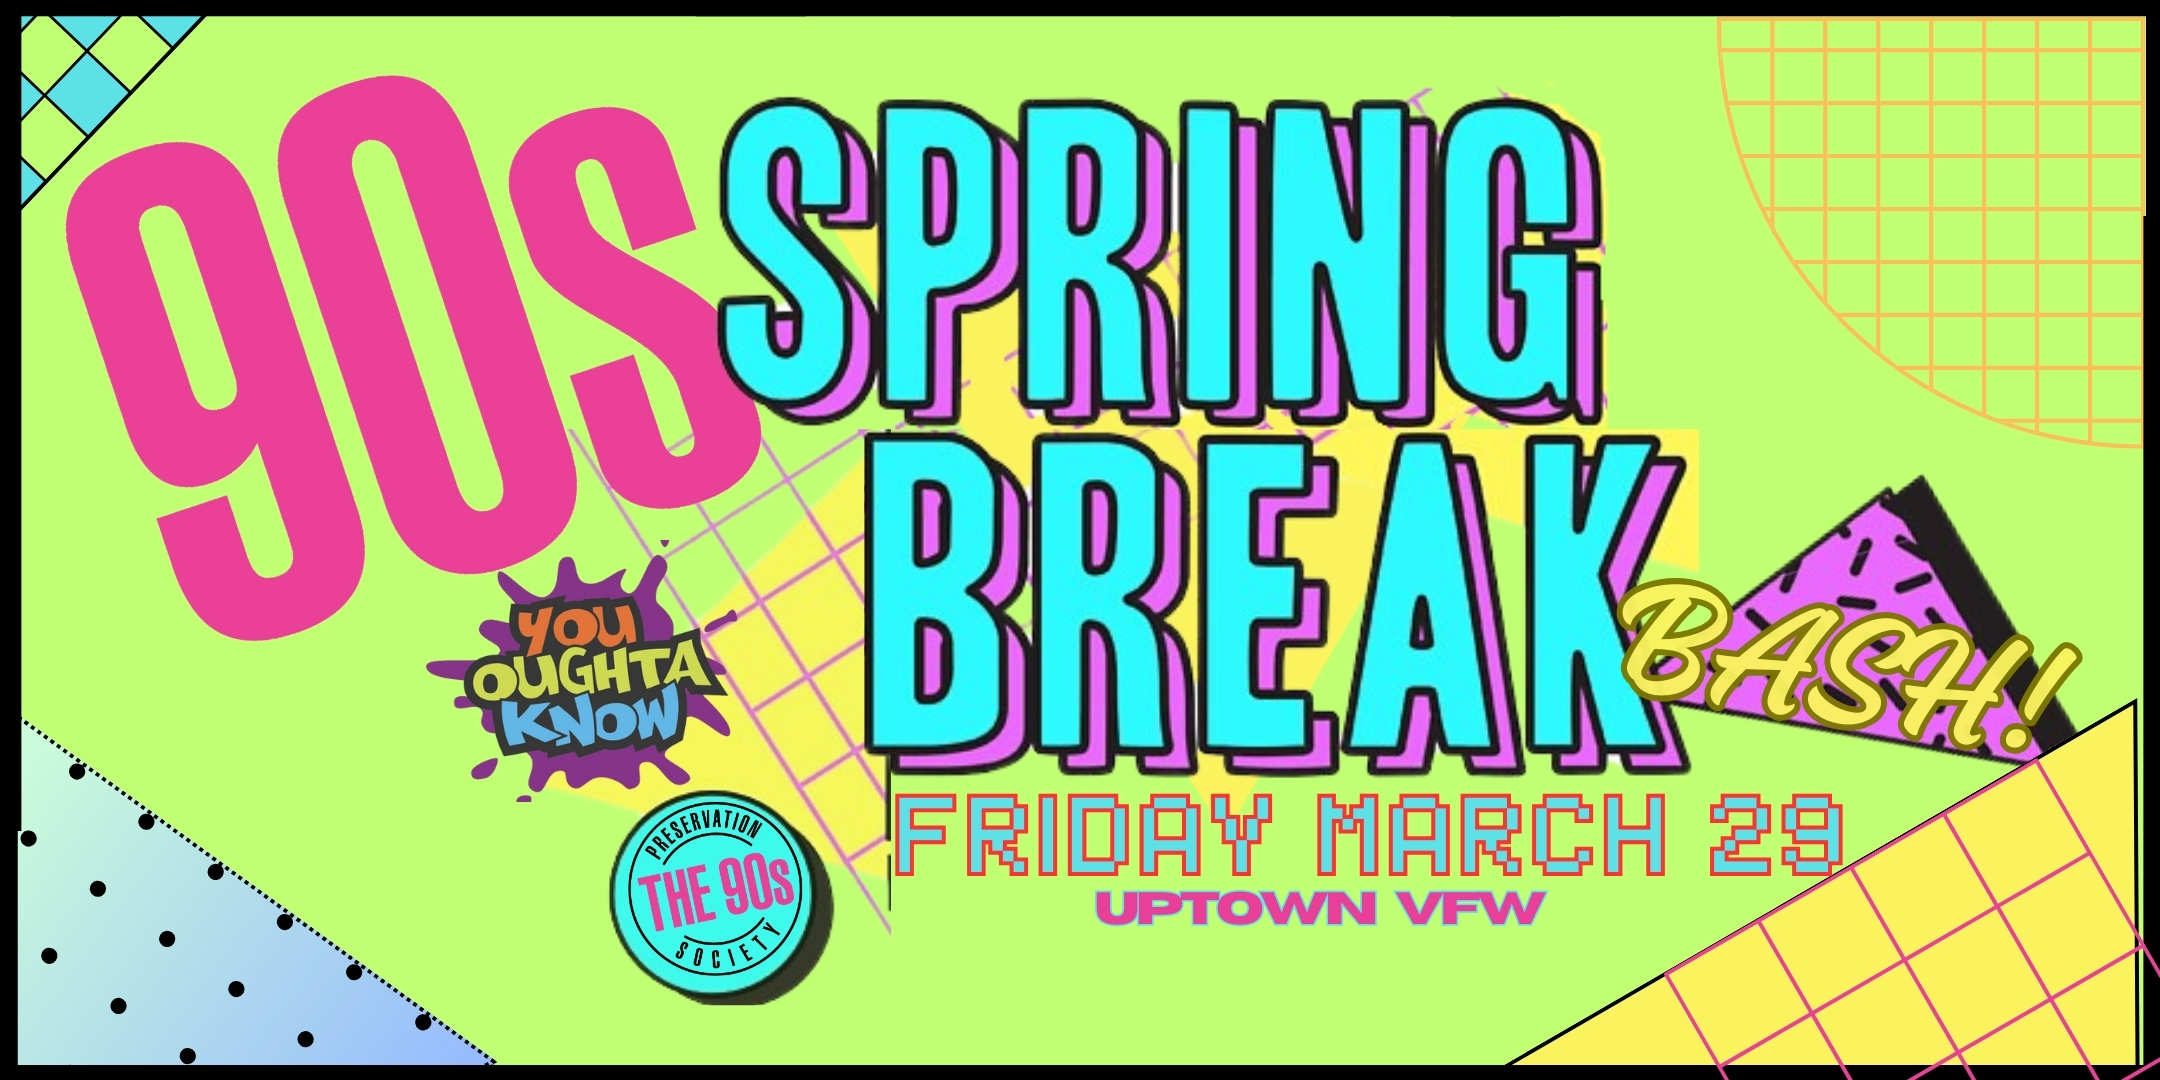 90s Spring Break Bash! You Oughta Know | 90s Preservation Society DJ / VJ Friday, March 29 James Ballentine "Uptown" VFW Post 246 Doors 9:00pm :: Music 9:00pm :: 21+ $15 ADV / $20 DOS TICKETS ON SALE NOW